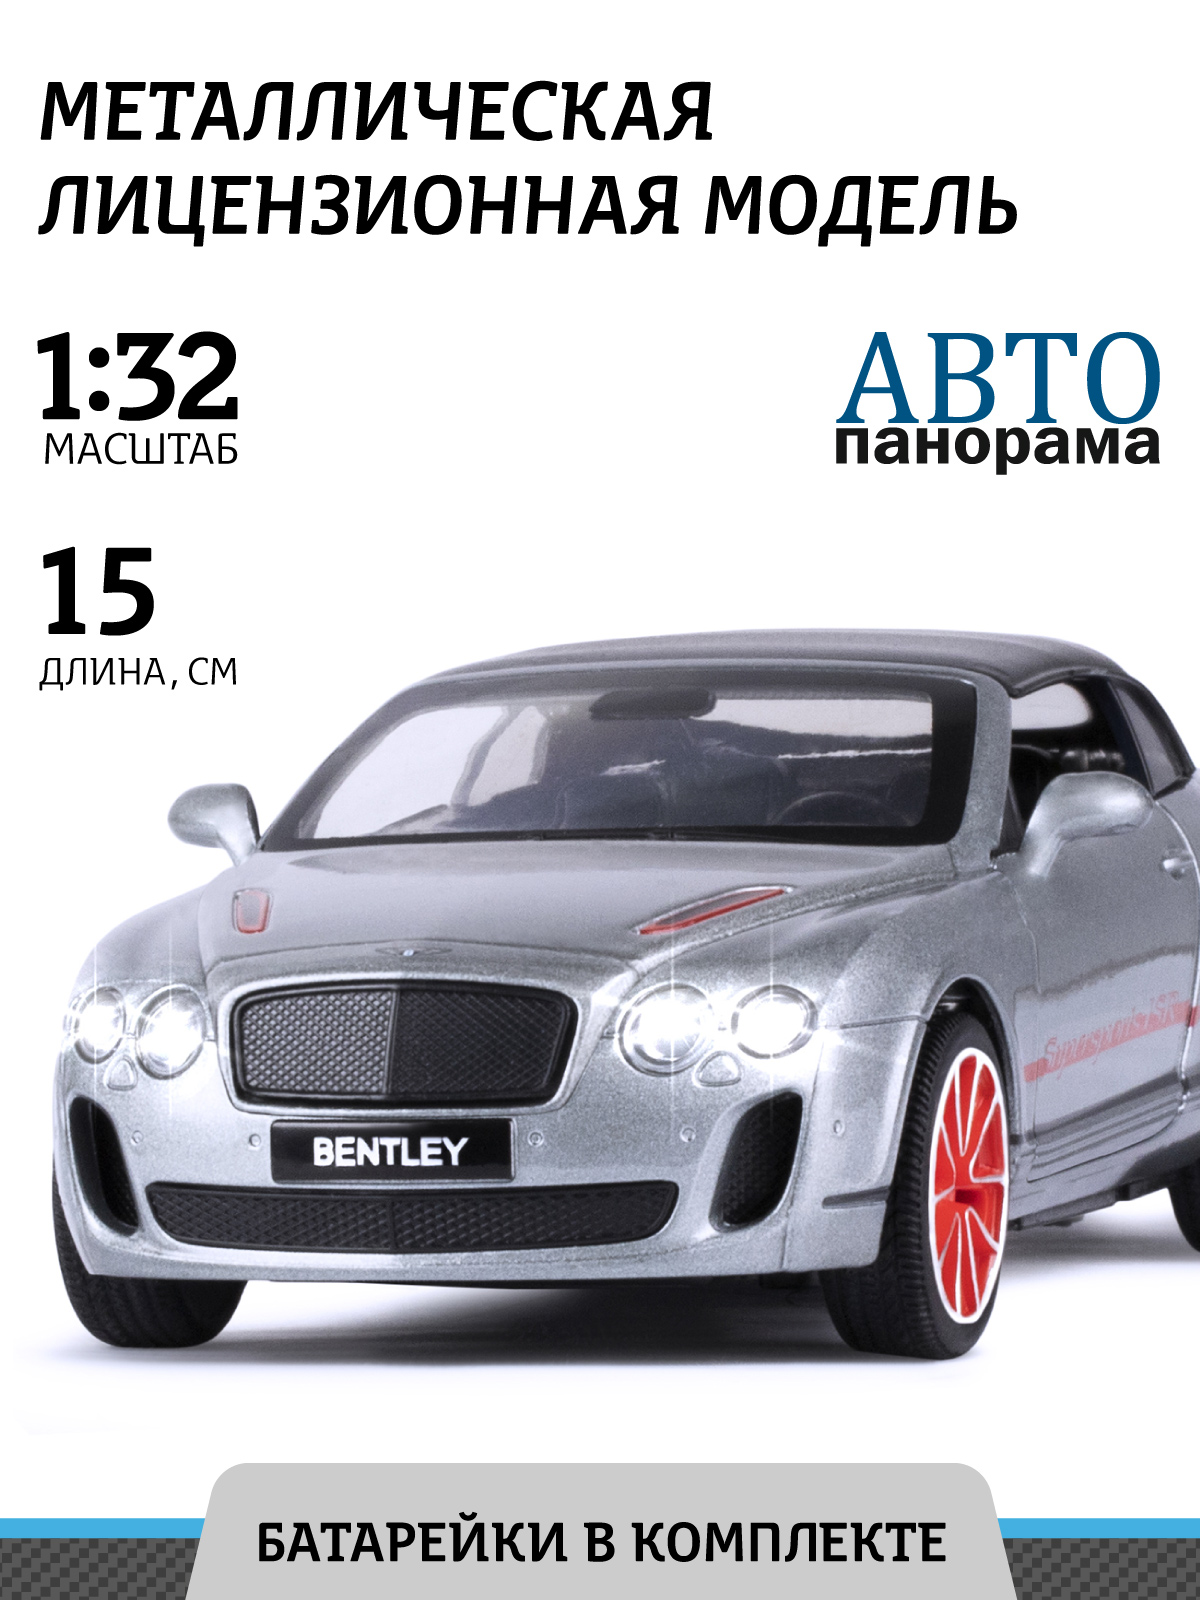 Машинка Автопанорама М1:32, Bentley Continental Supersports ISR серебряный, JB1251397 maisto new 1 18 ducati supersports alloy diecast motorcycle model workable shork absorber toy for children gifts toy collection